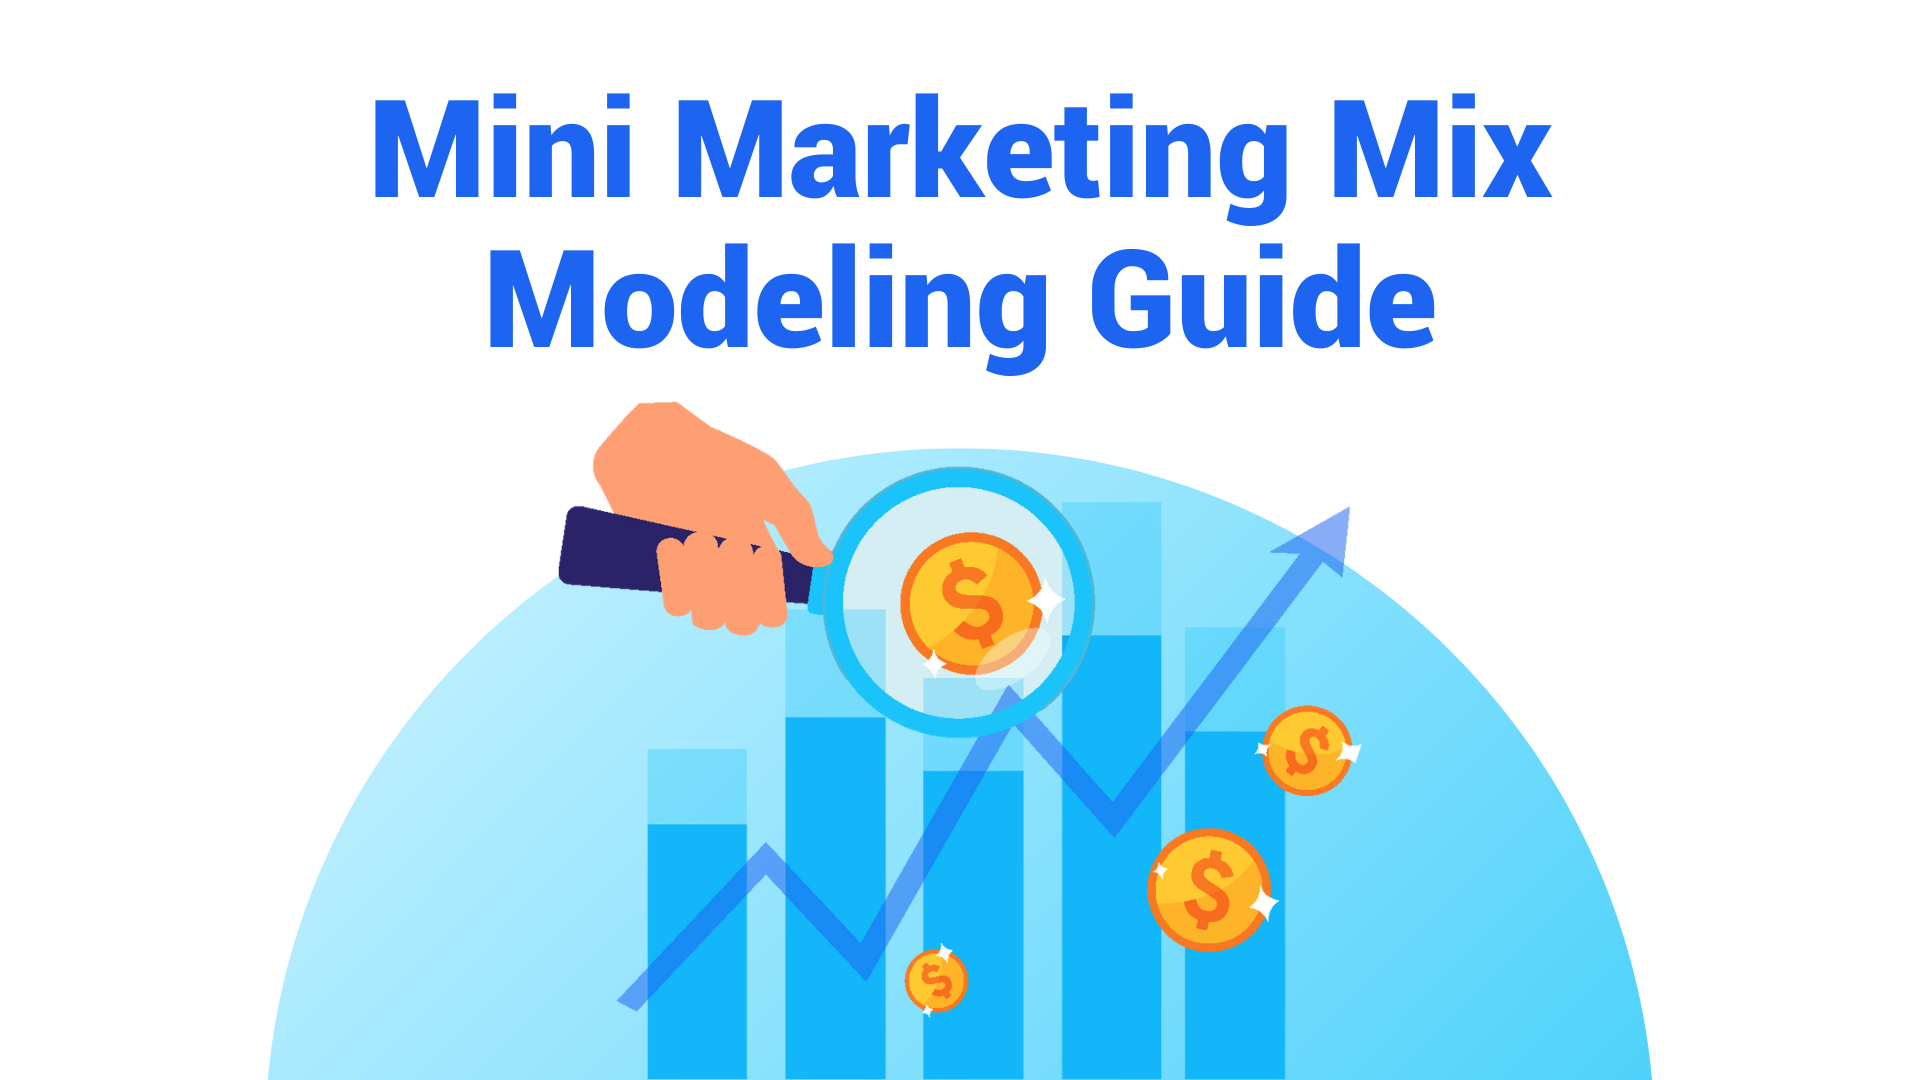 Marketing Mix Modeling Guide